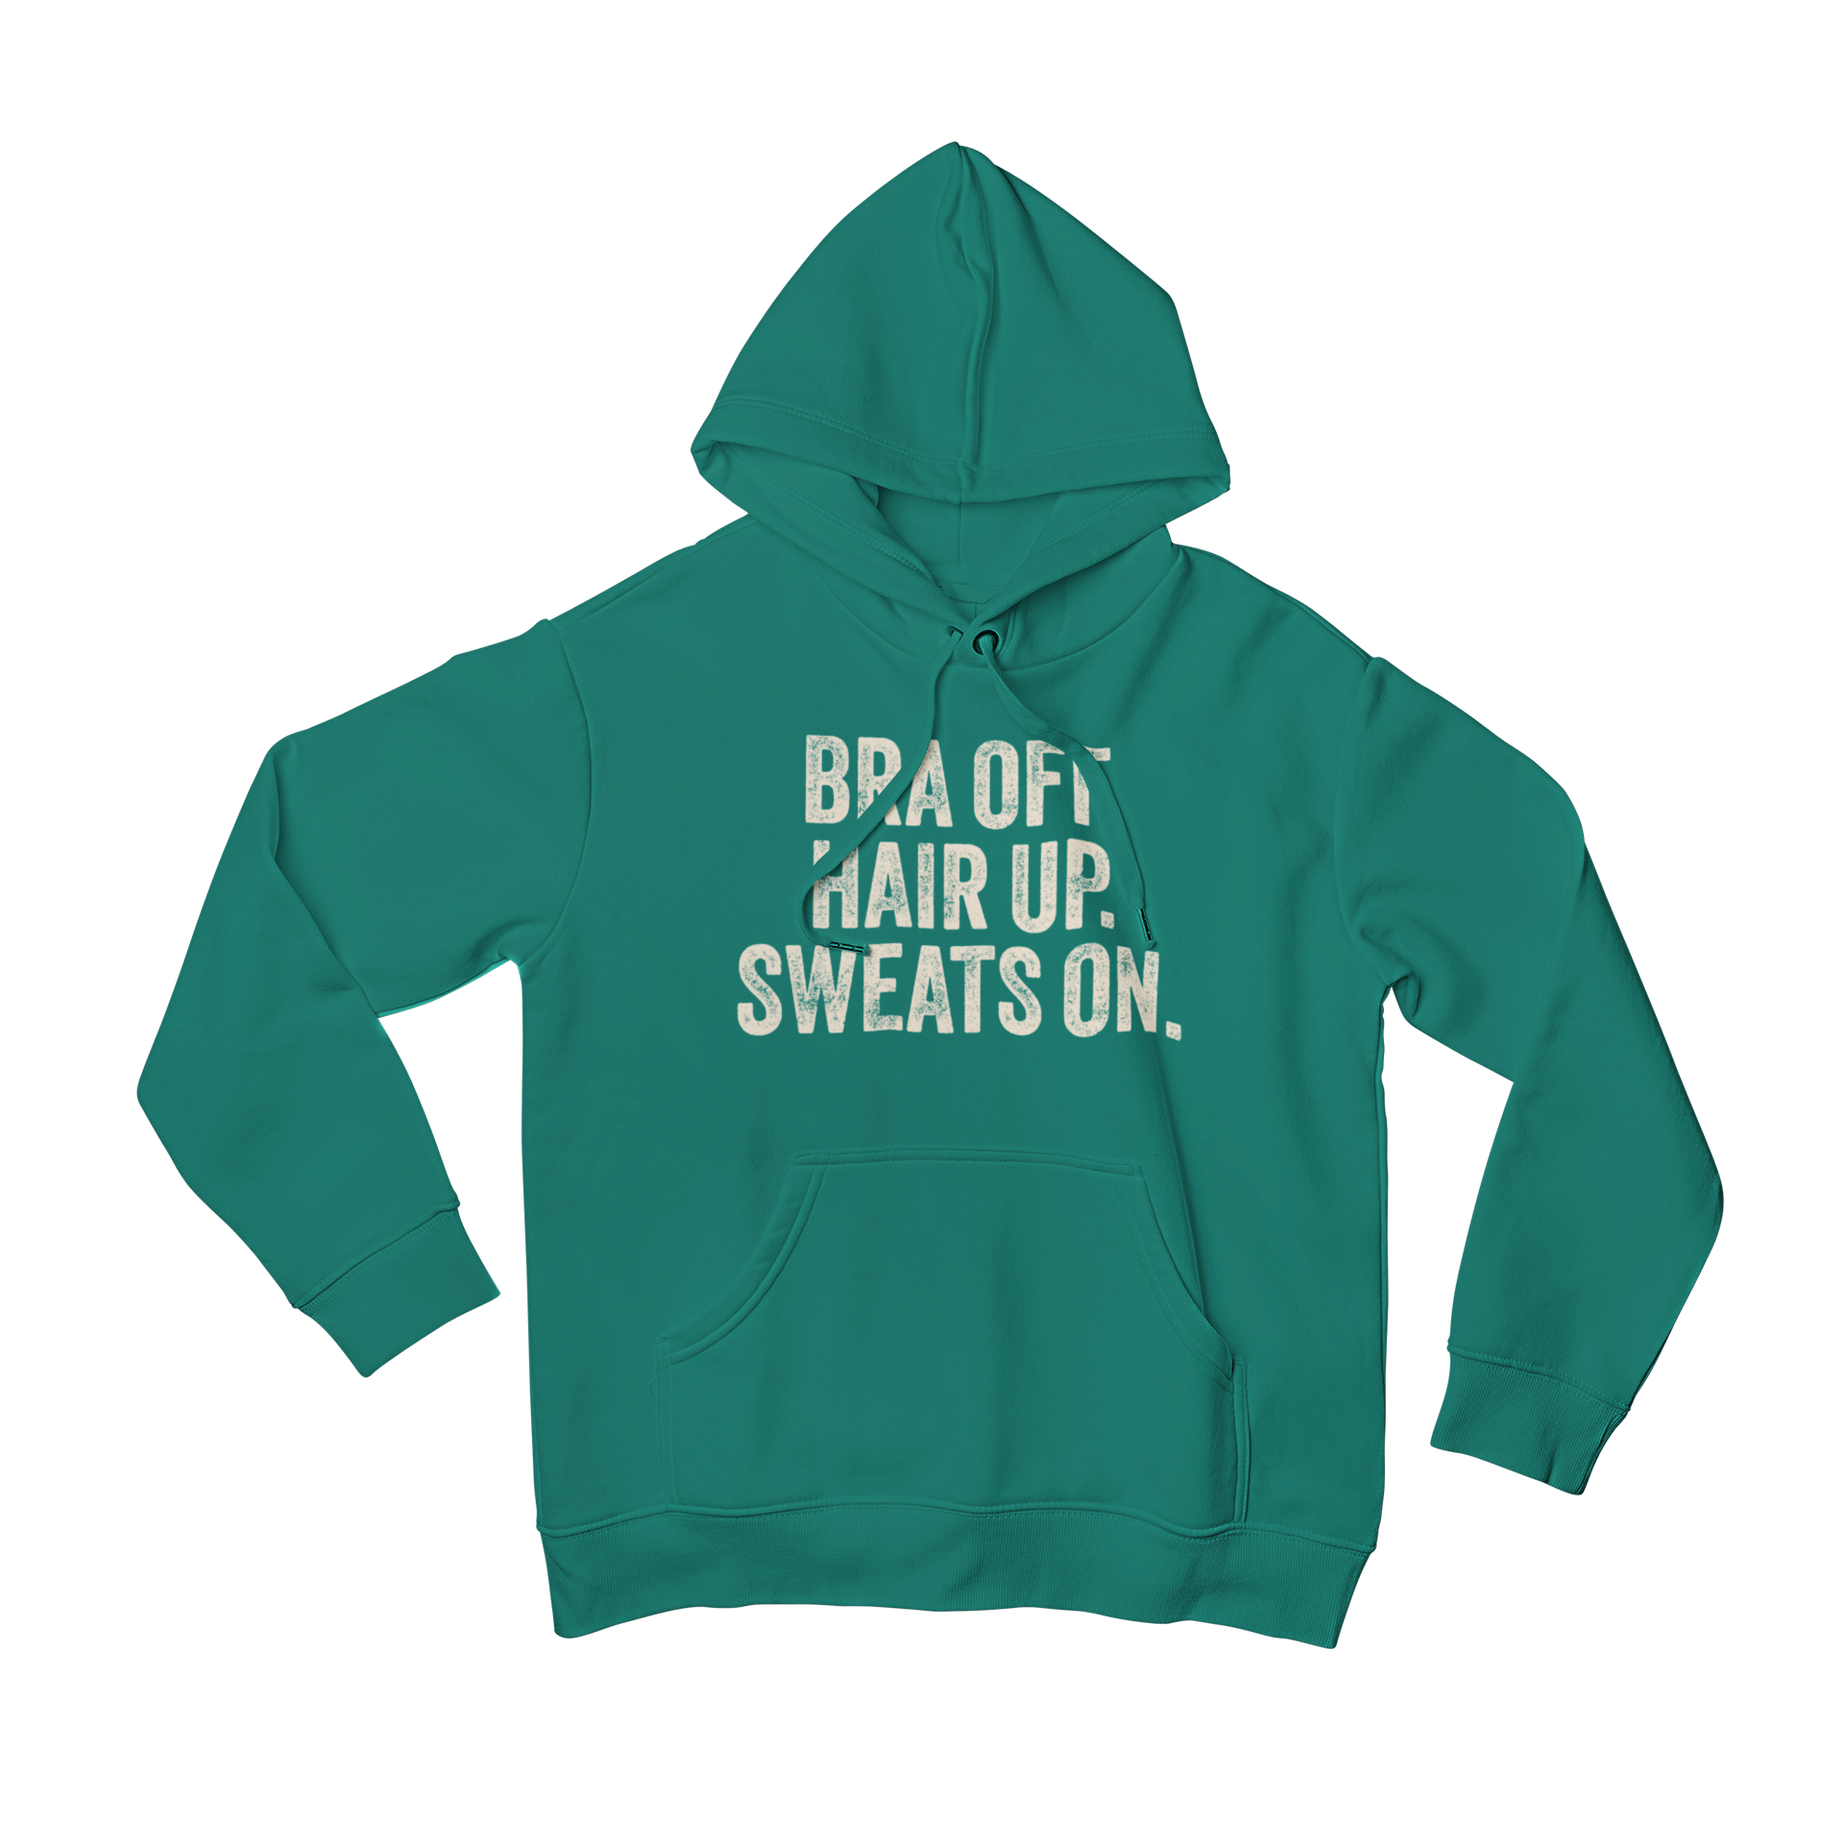 Unleash your inner playful side with our Bra Off Front Print Hoodie. Featuring a quirky slogan front print and a comfortable fit, this hoodie is perfect for those days when you just want to let your hair down and relax in style. Grab your sweats and get ready to unwind!